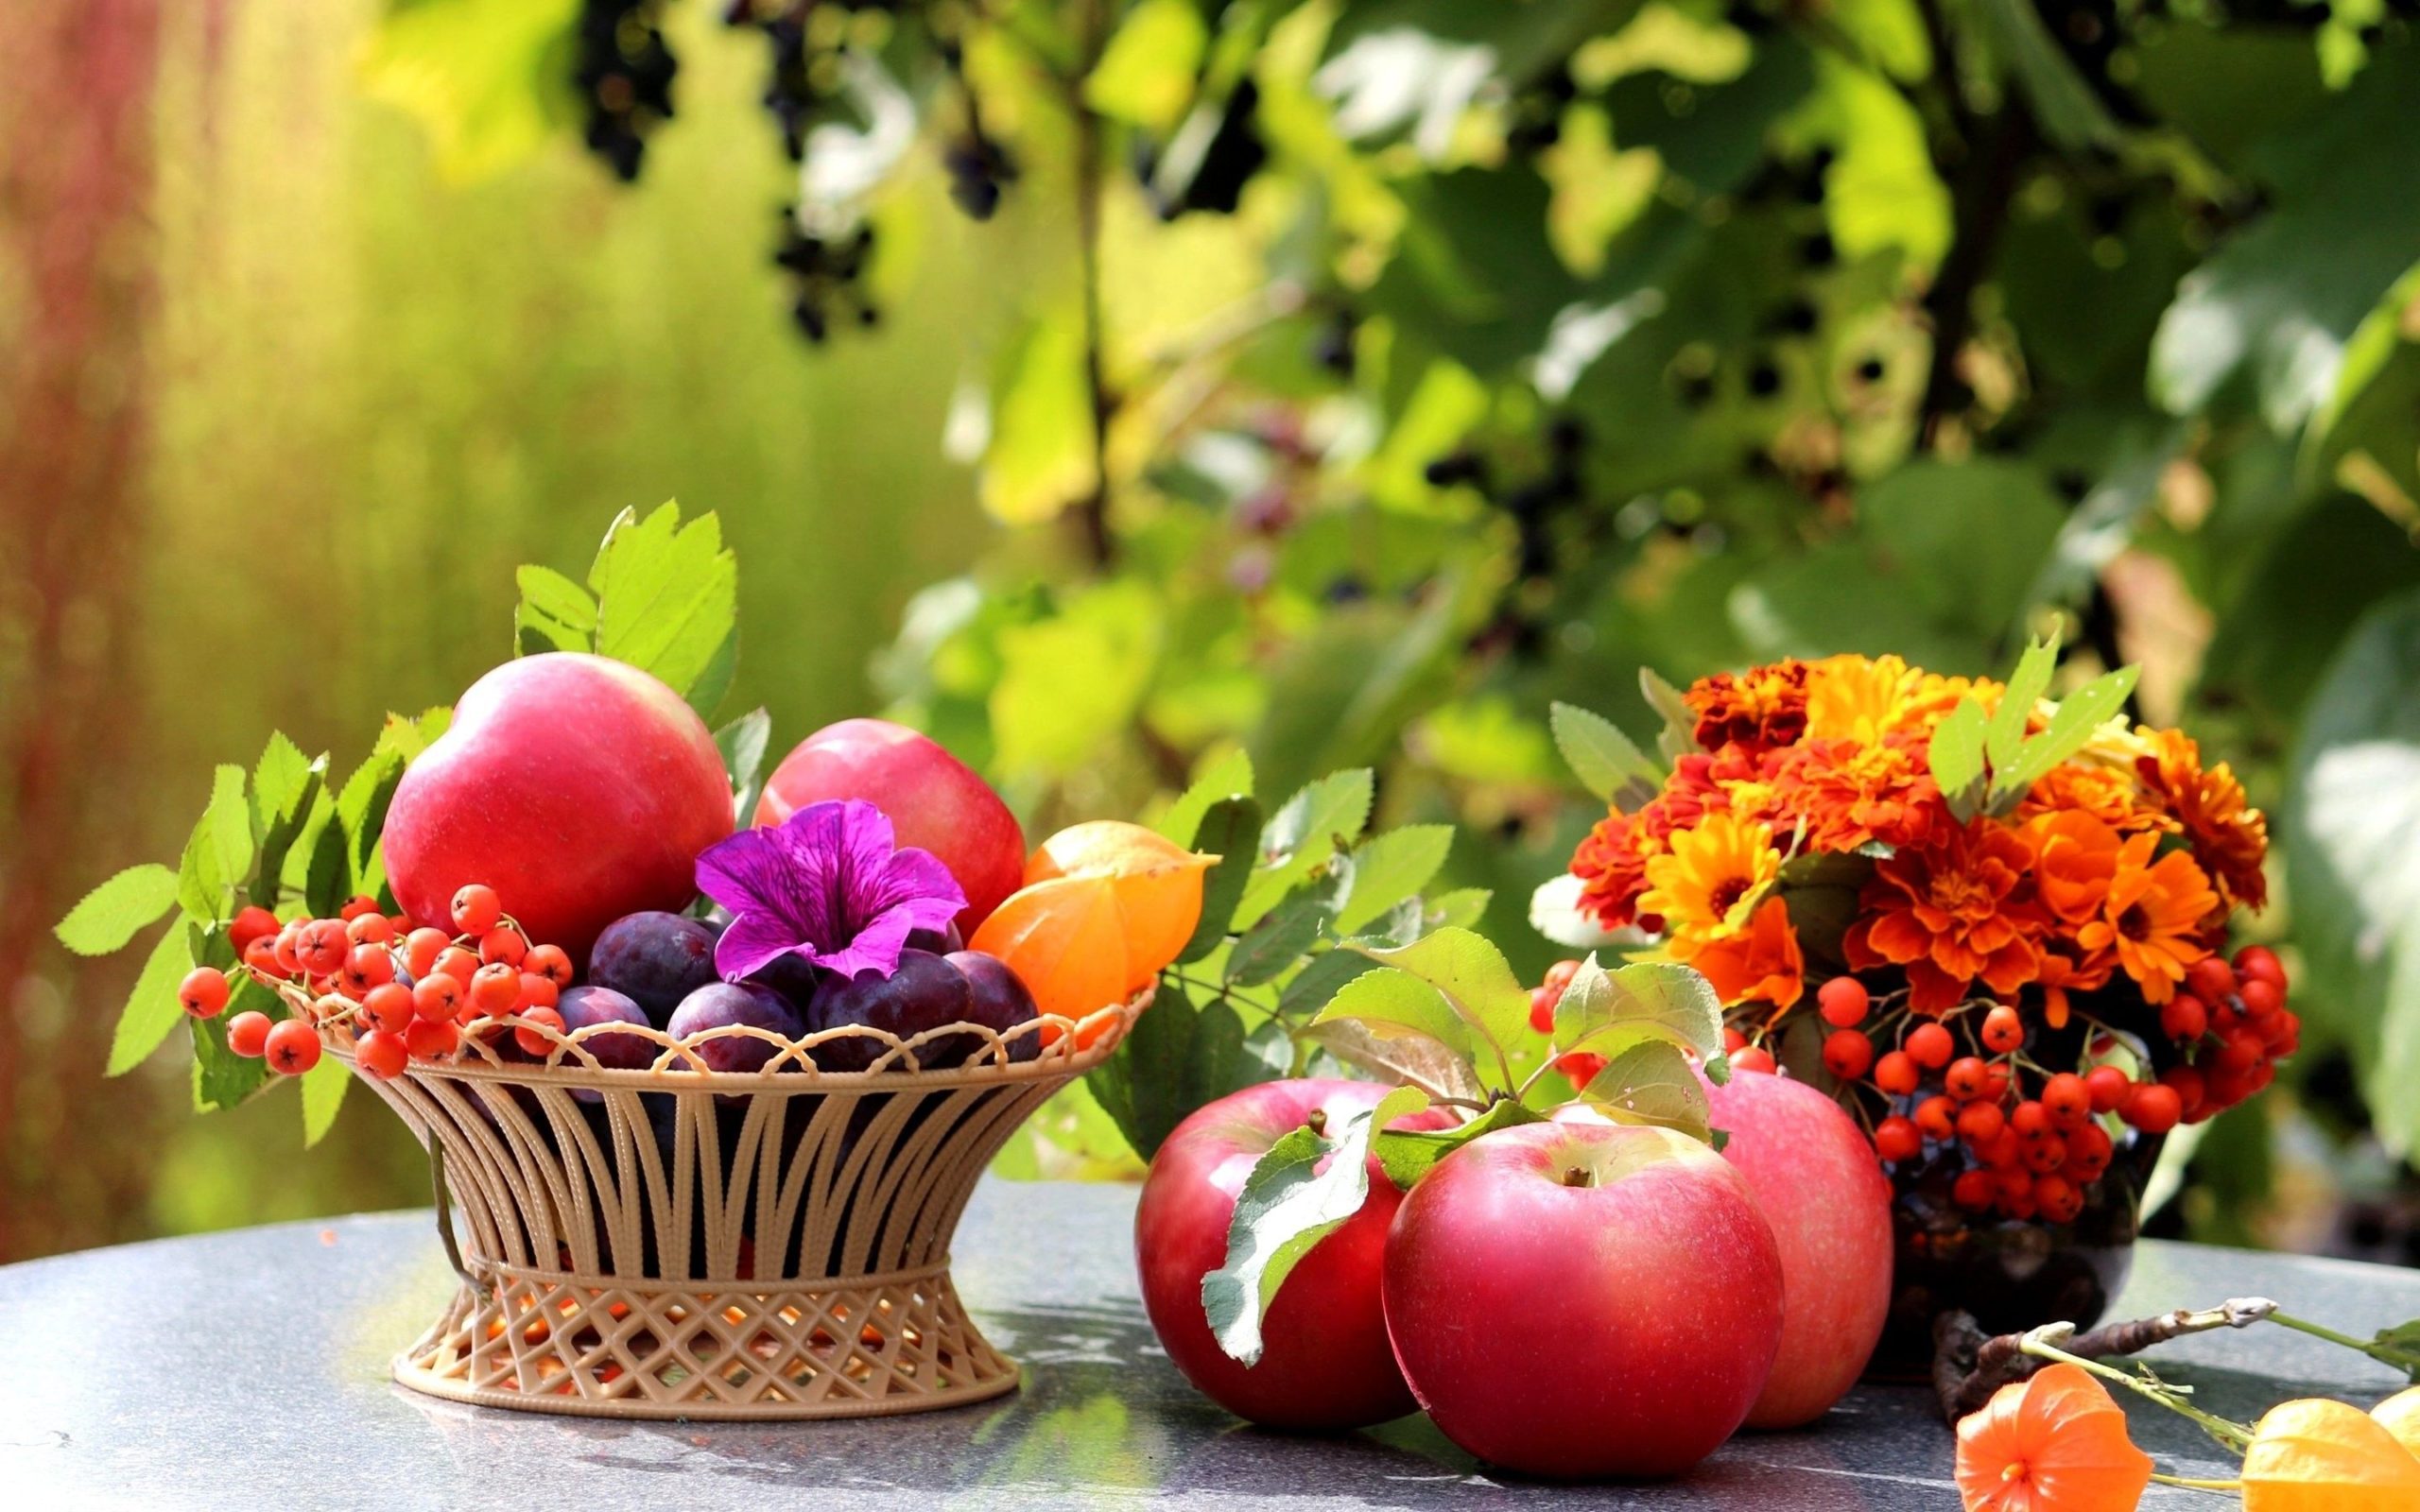 fruits images hd free download